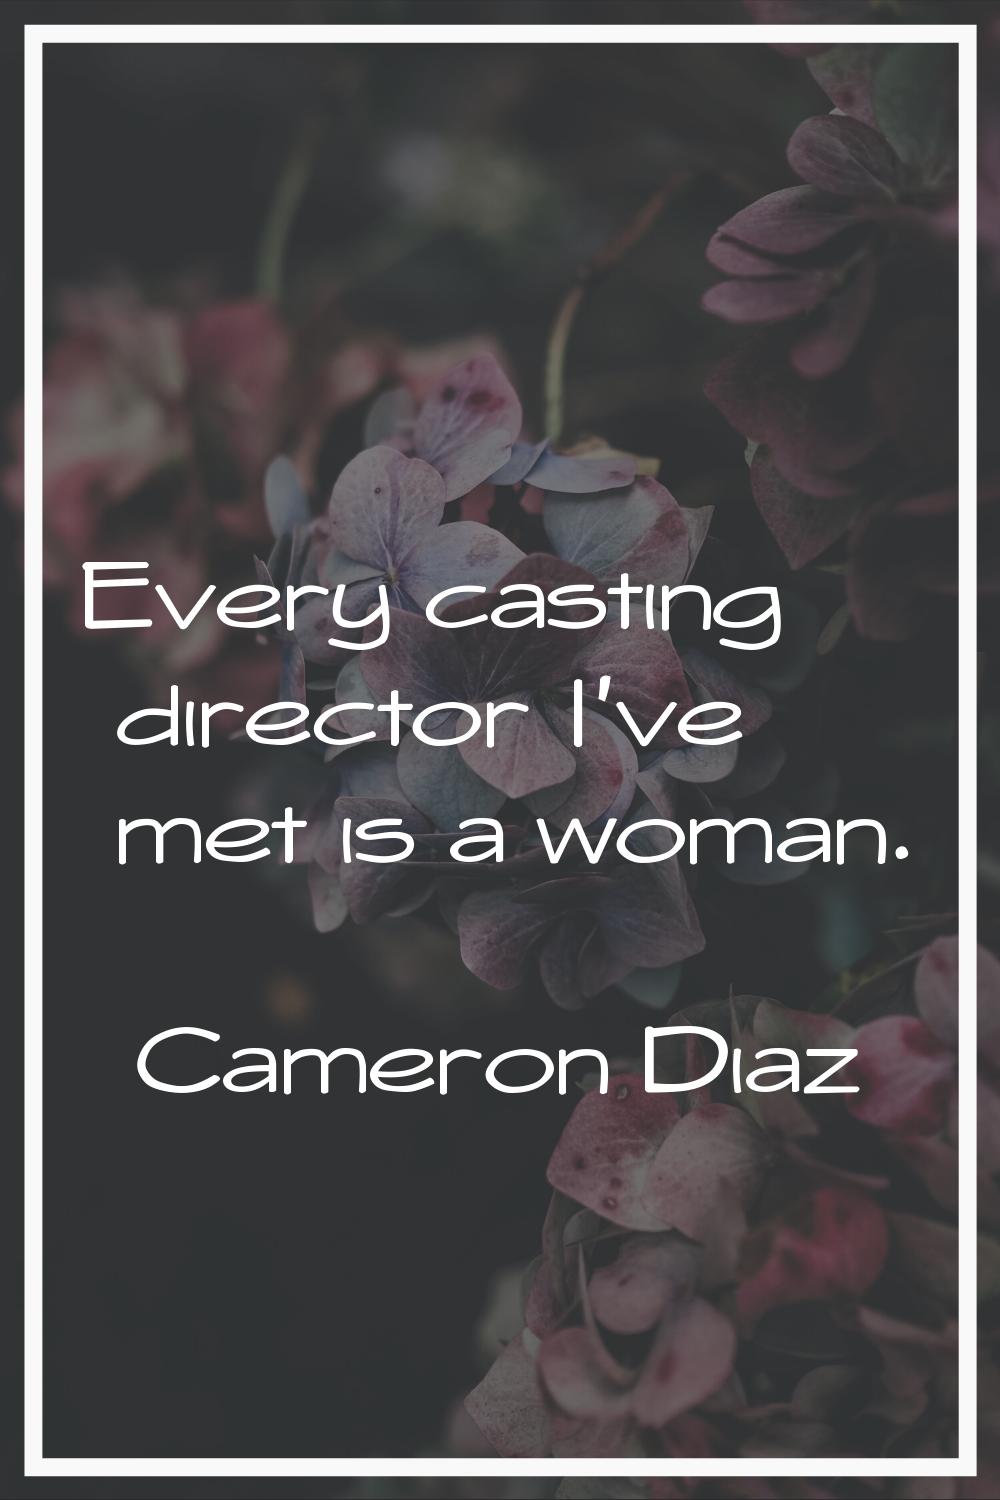 Every casting director I've met is a woman.